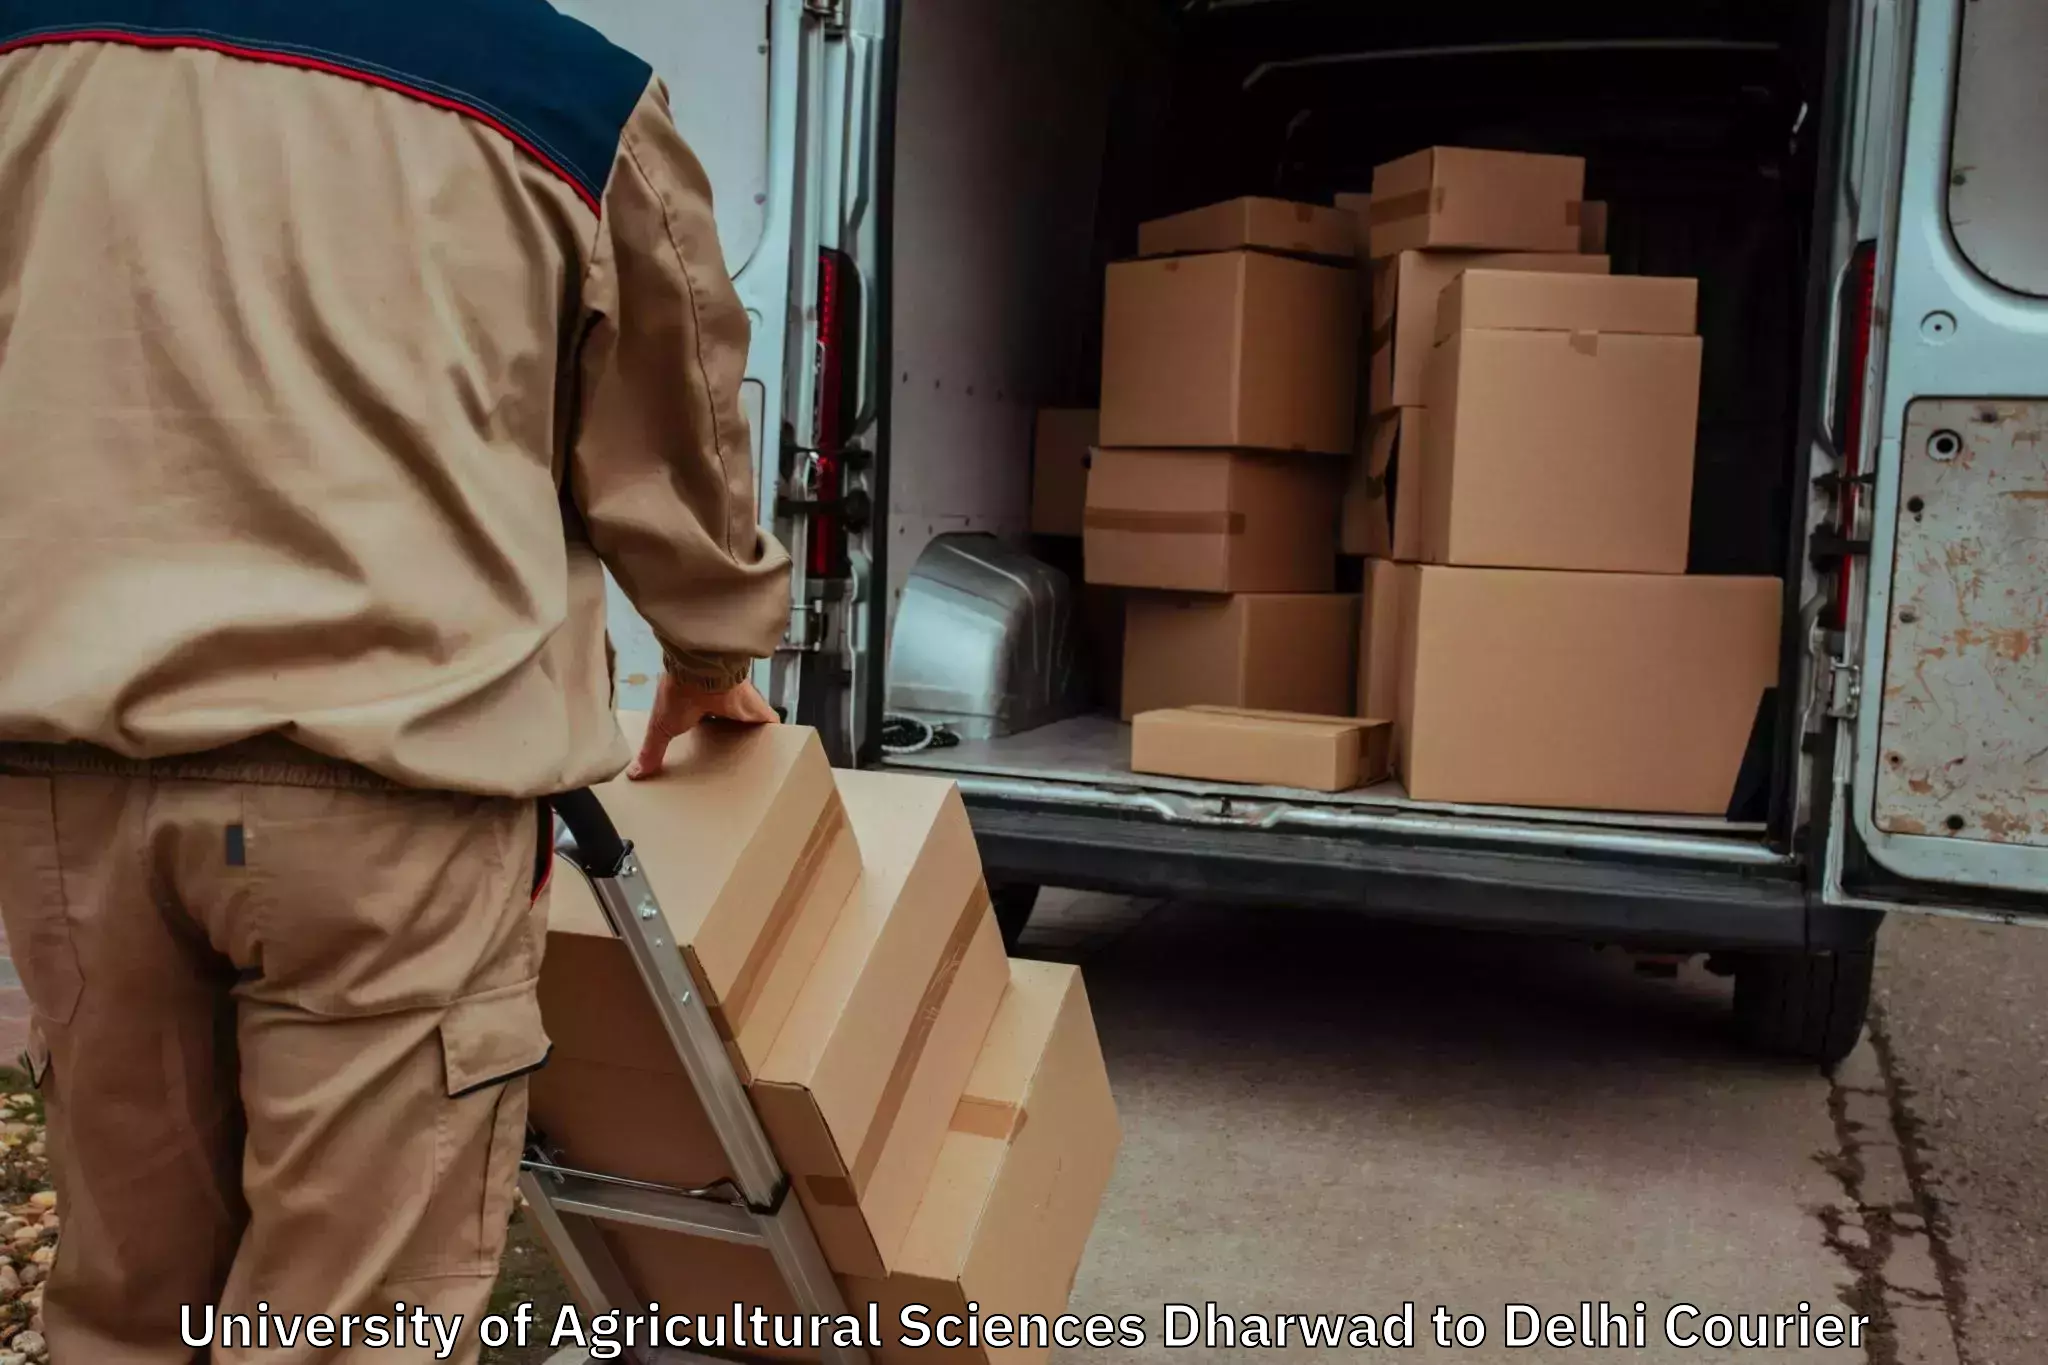 Professional home goods transport in University of Agricultural Sciences Dharwad to University of Delhi